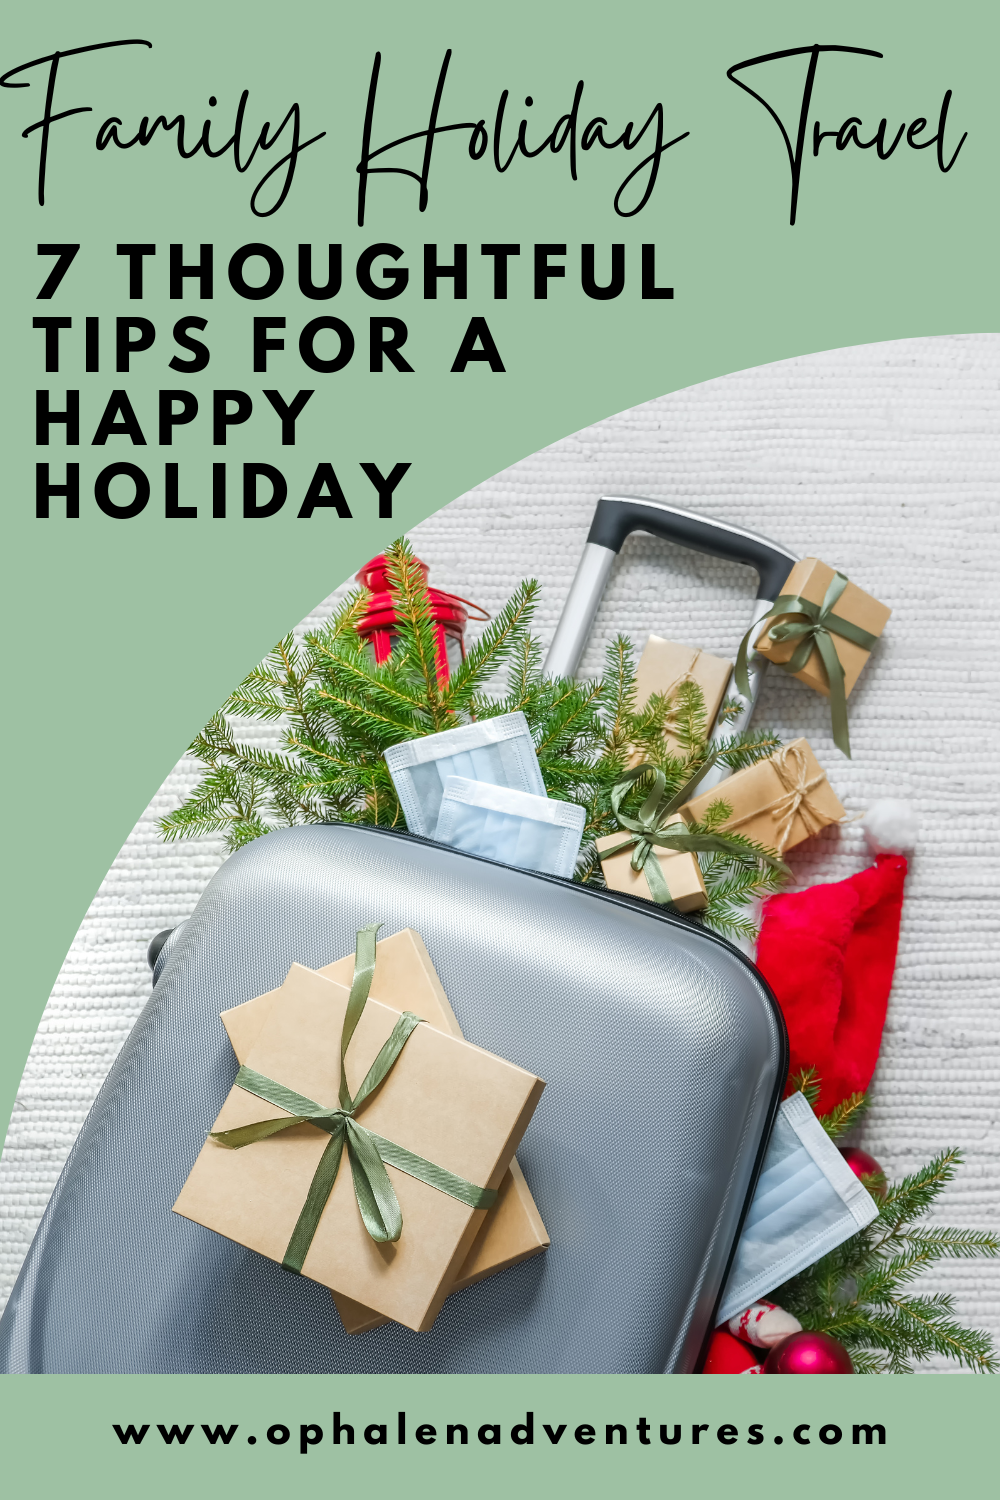 Family Holiday Travel: 7 Thoughtful Tips for a Happy Holiday